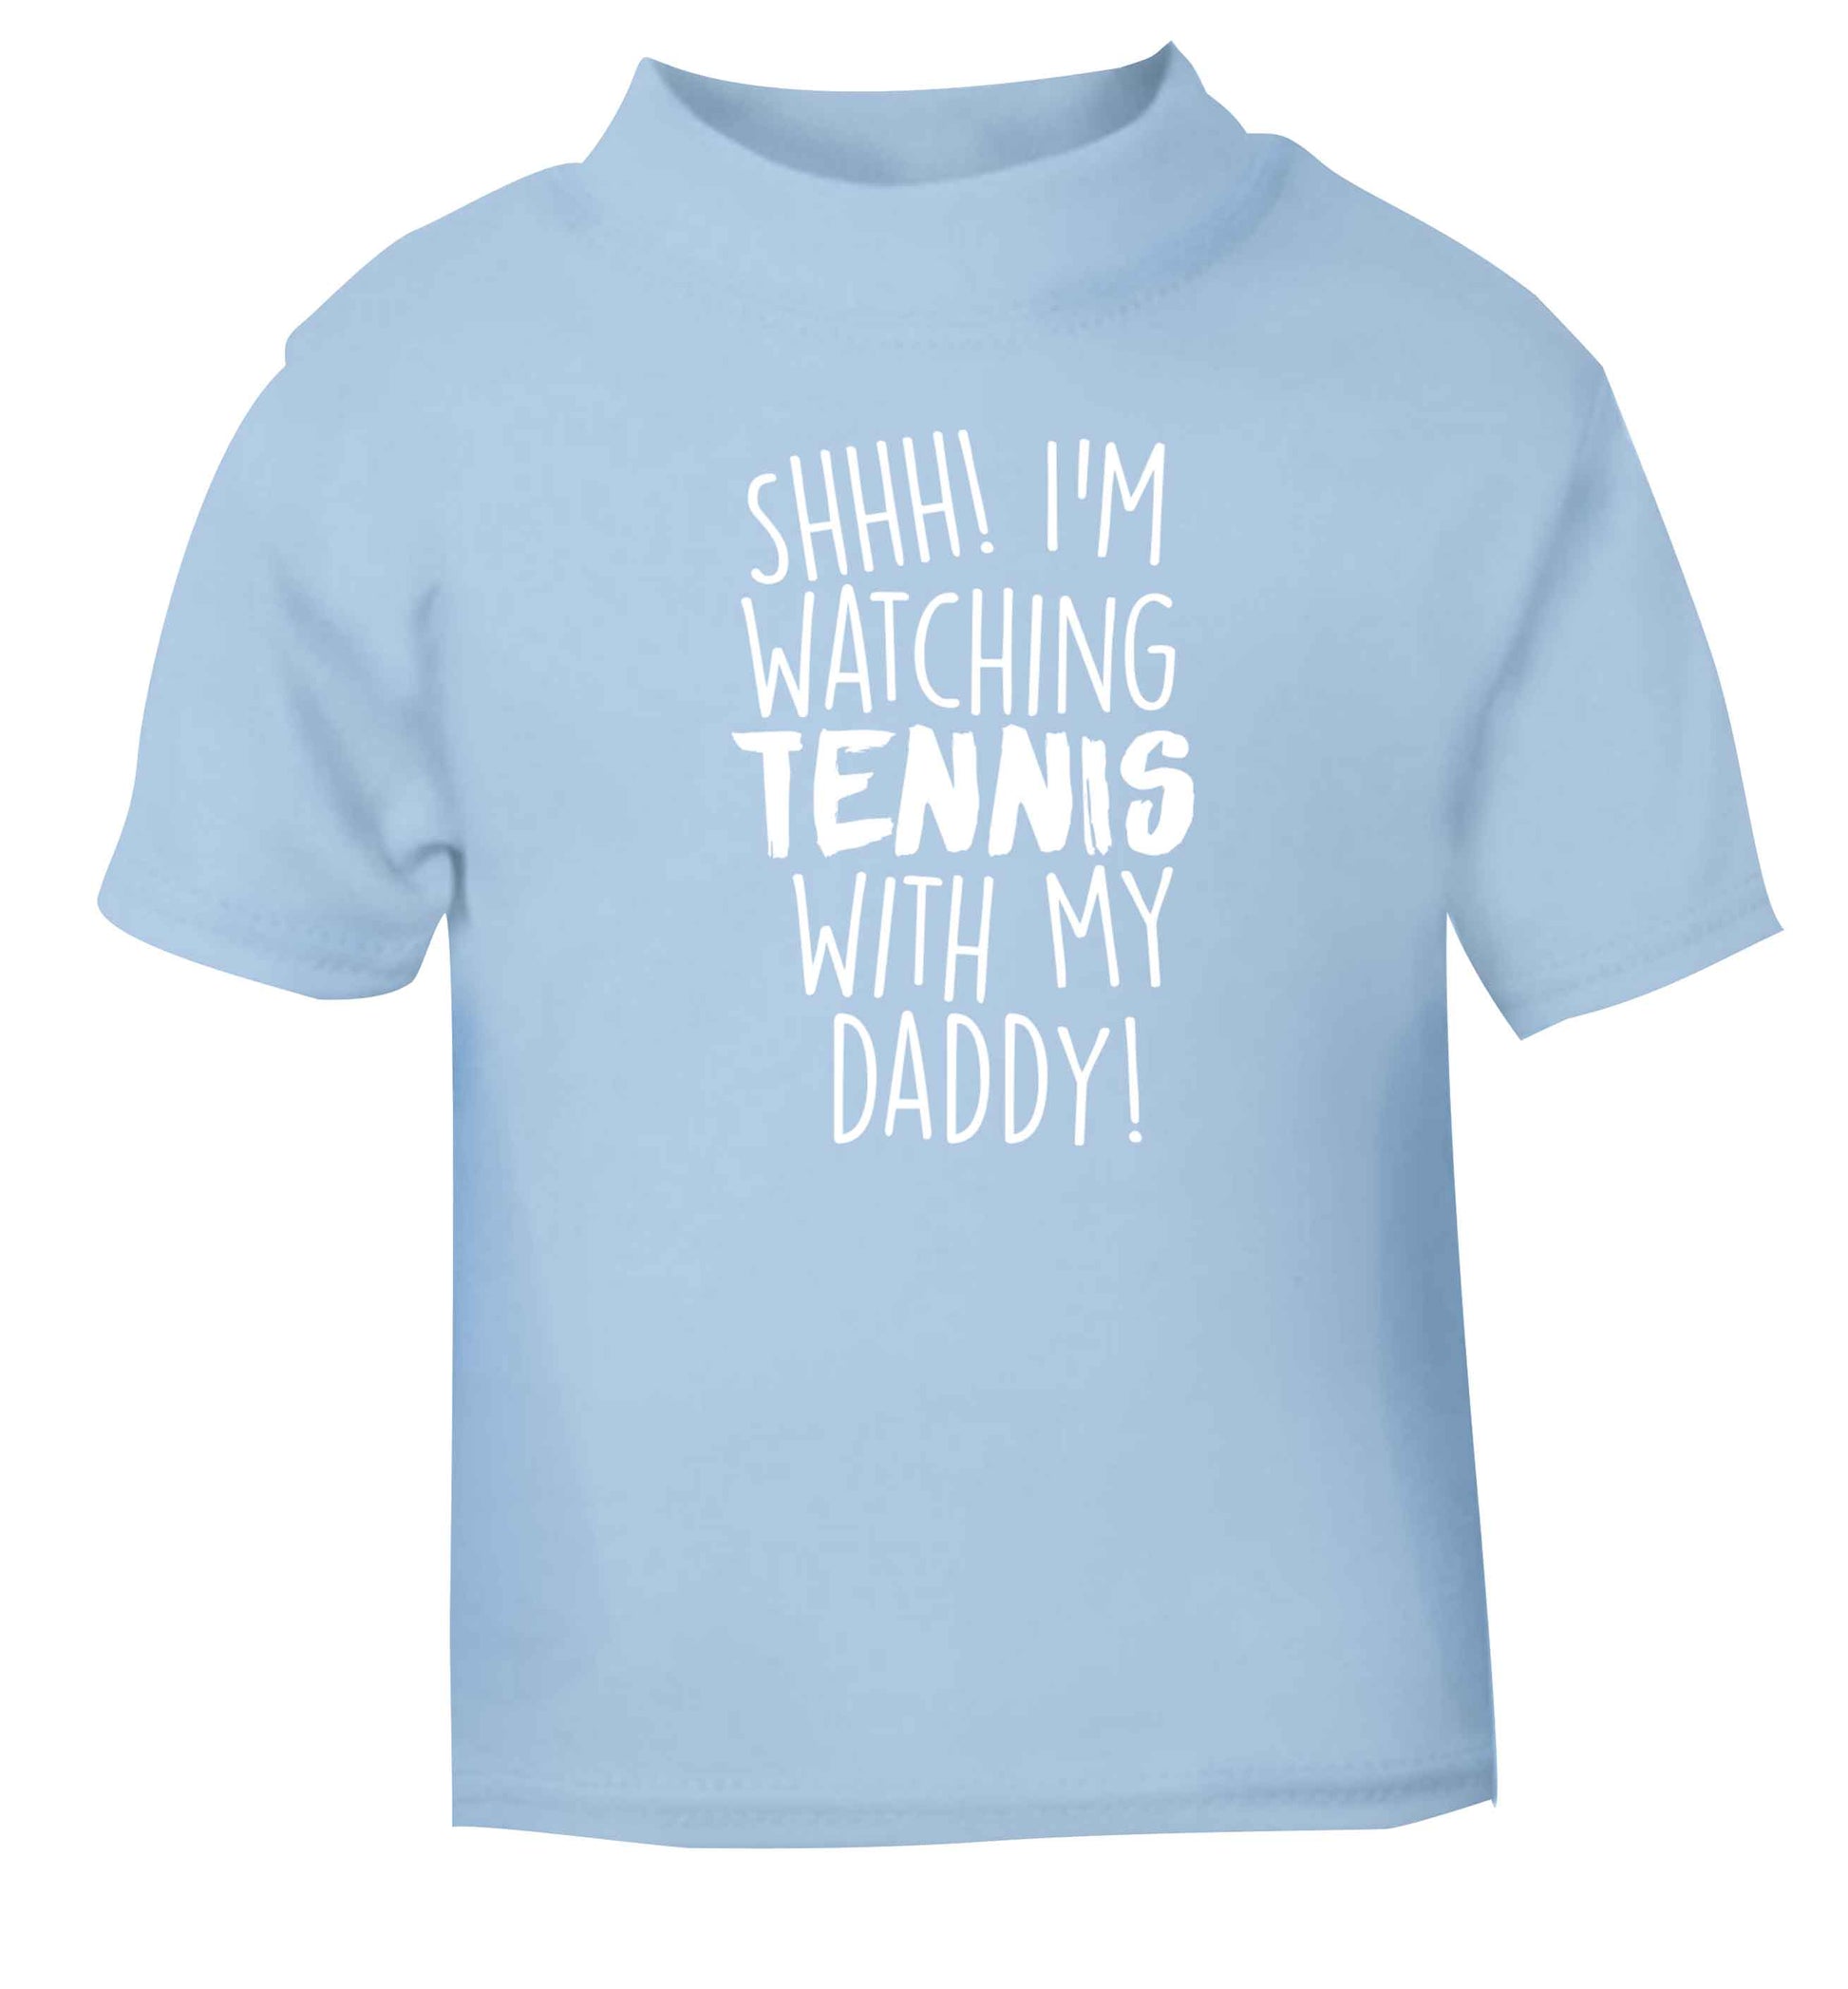 Shh! I'm watching tennis with my daddy! light blue Baby Toddler Tshirt 2 Years